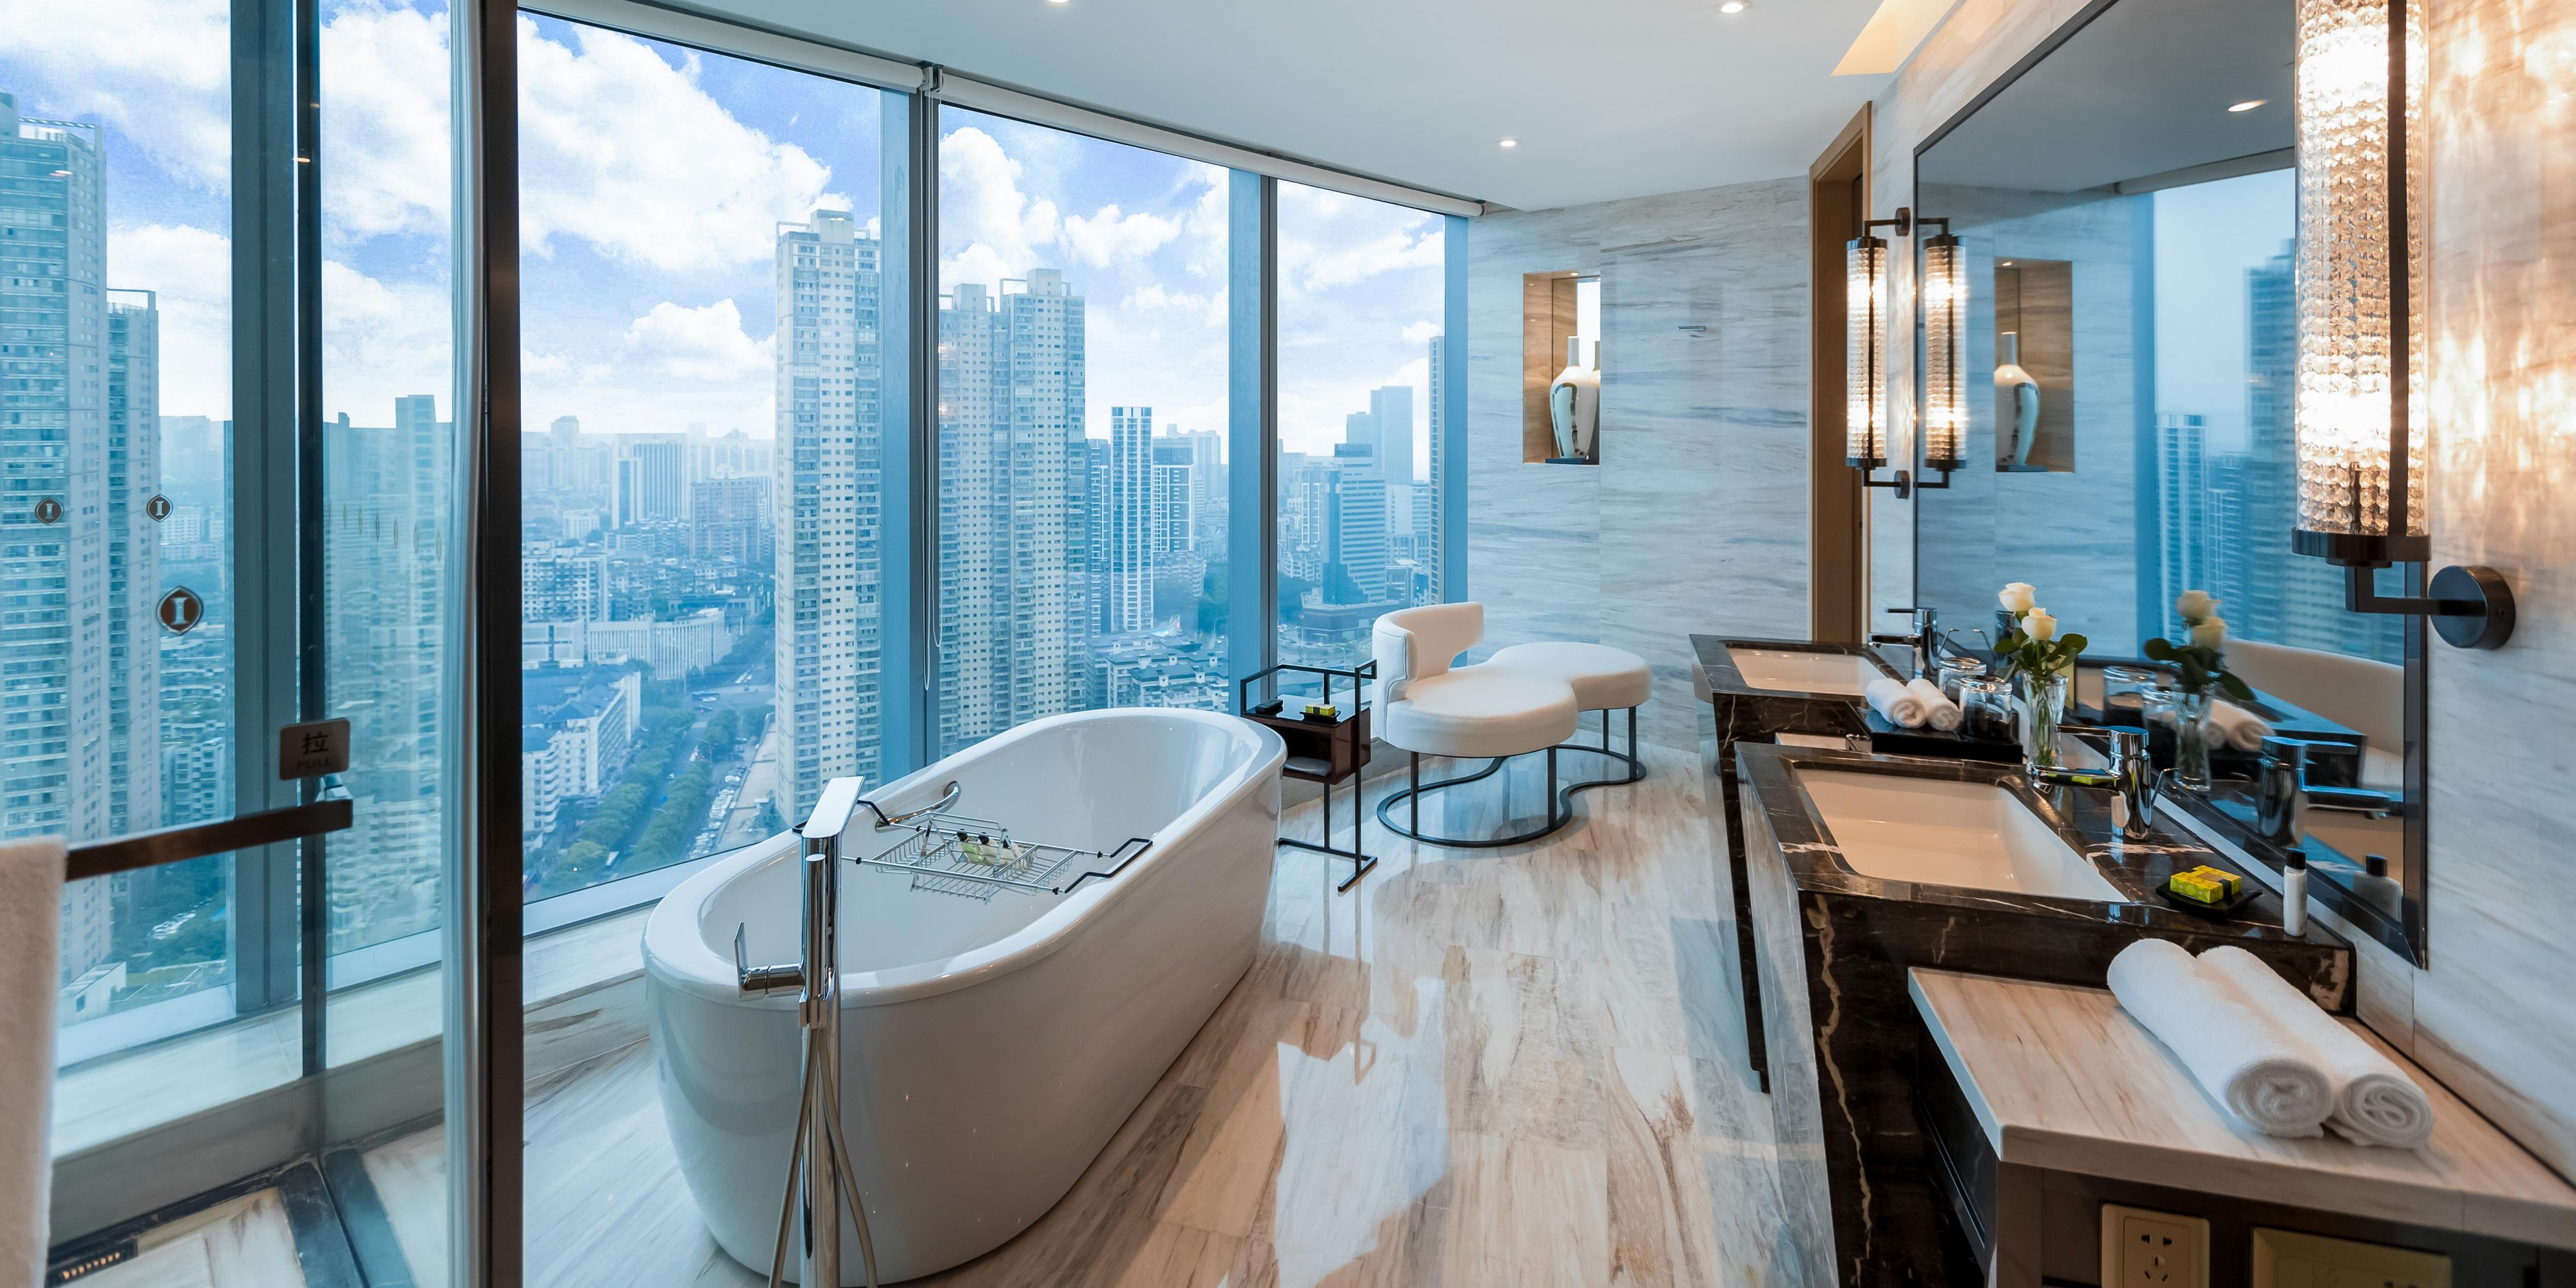 Enjoy your desirable and comfortable journey experiences at Club InterContinental Premier Room. This room covers an area of 70 squares meters and the beauty of room surroundings is full with innovative and elegant design.The unique design of bathroom offers mesmerizing city views of Fuzhou.